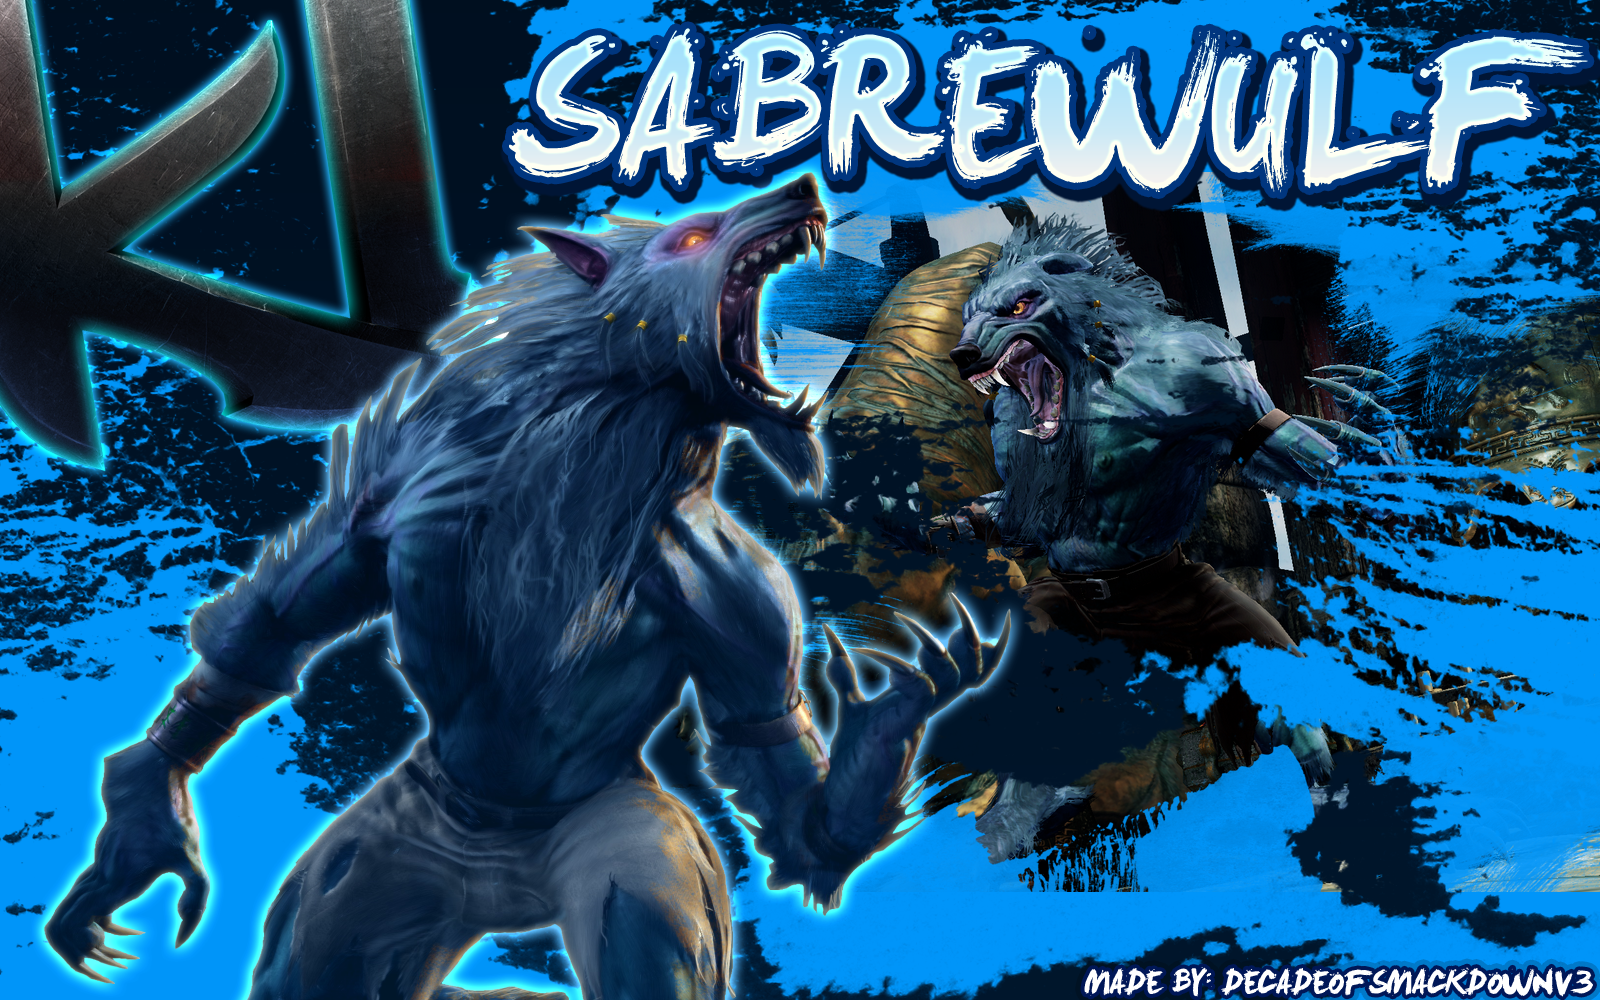 Top Sabrewulf Wallpaper Images for Pinterest